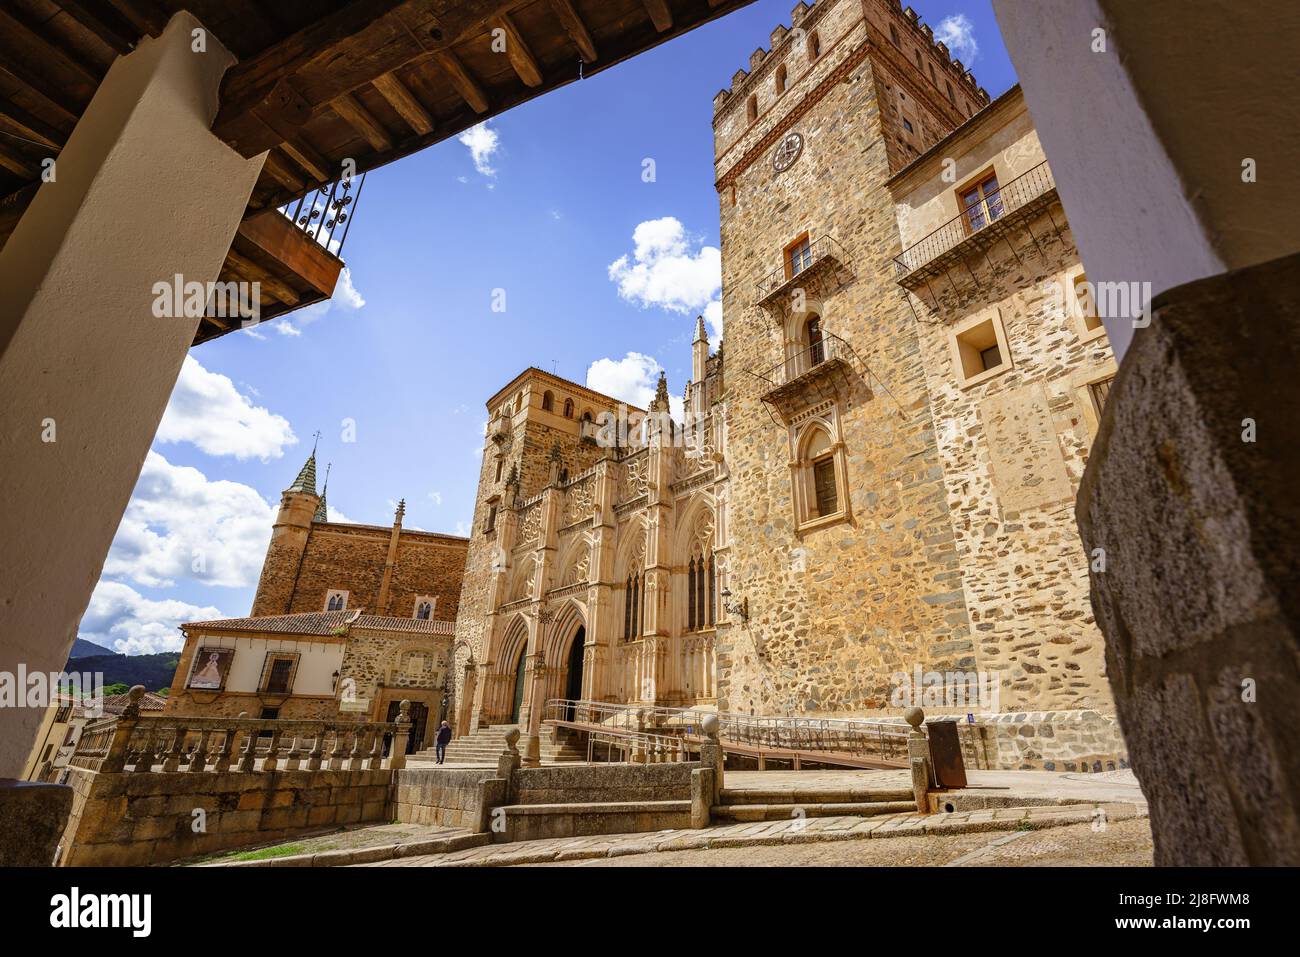 Real Monasterio de Guadalupe in Extremadura, Spain is a Religious Catholic building has been built from the 13th century onwards Stock Photo